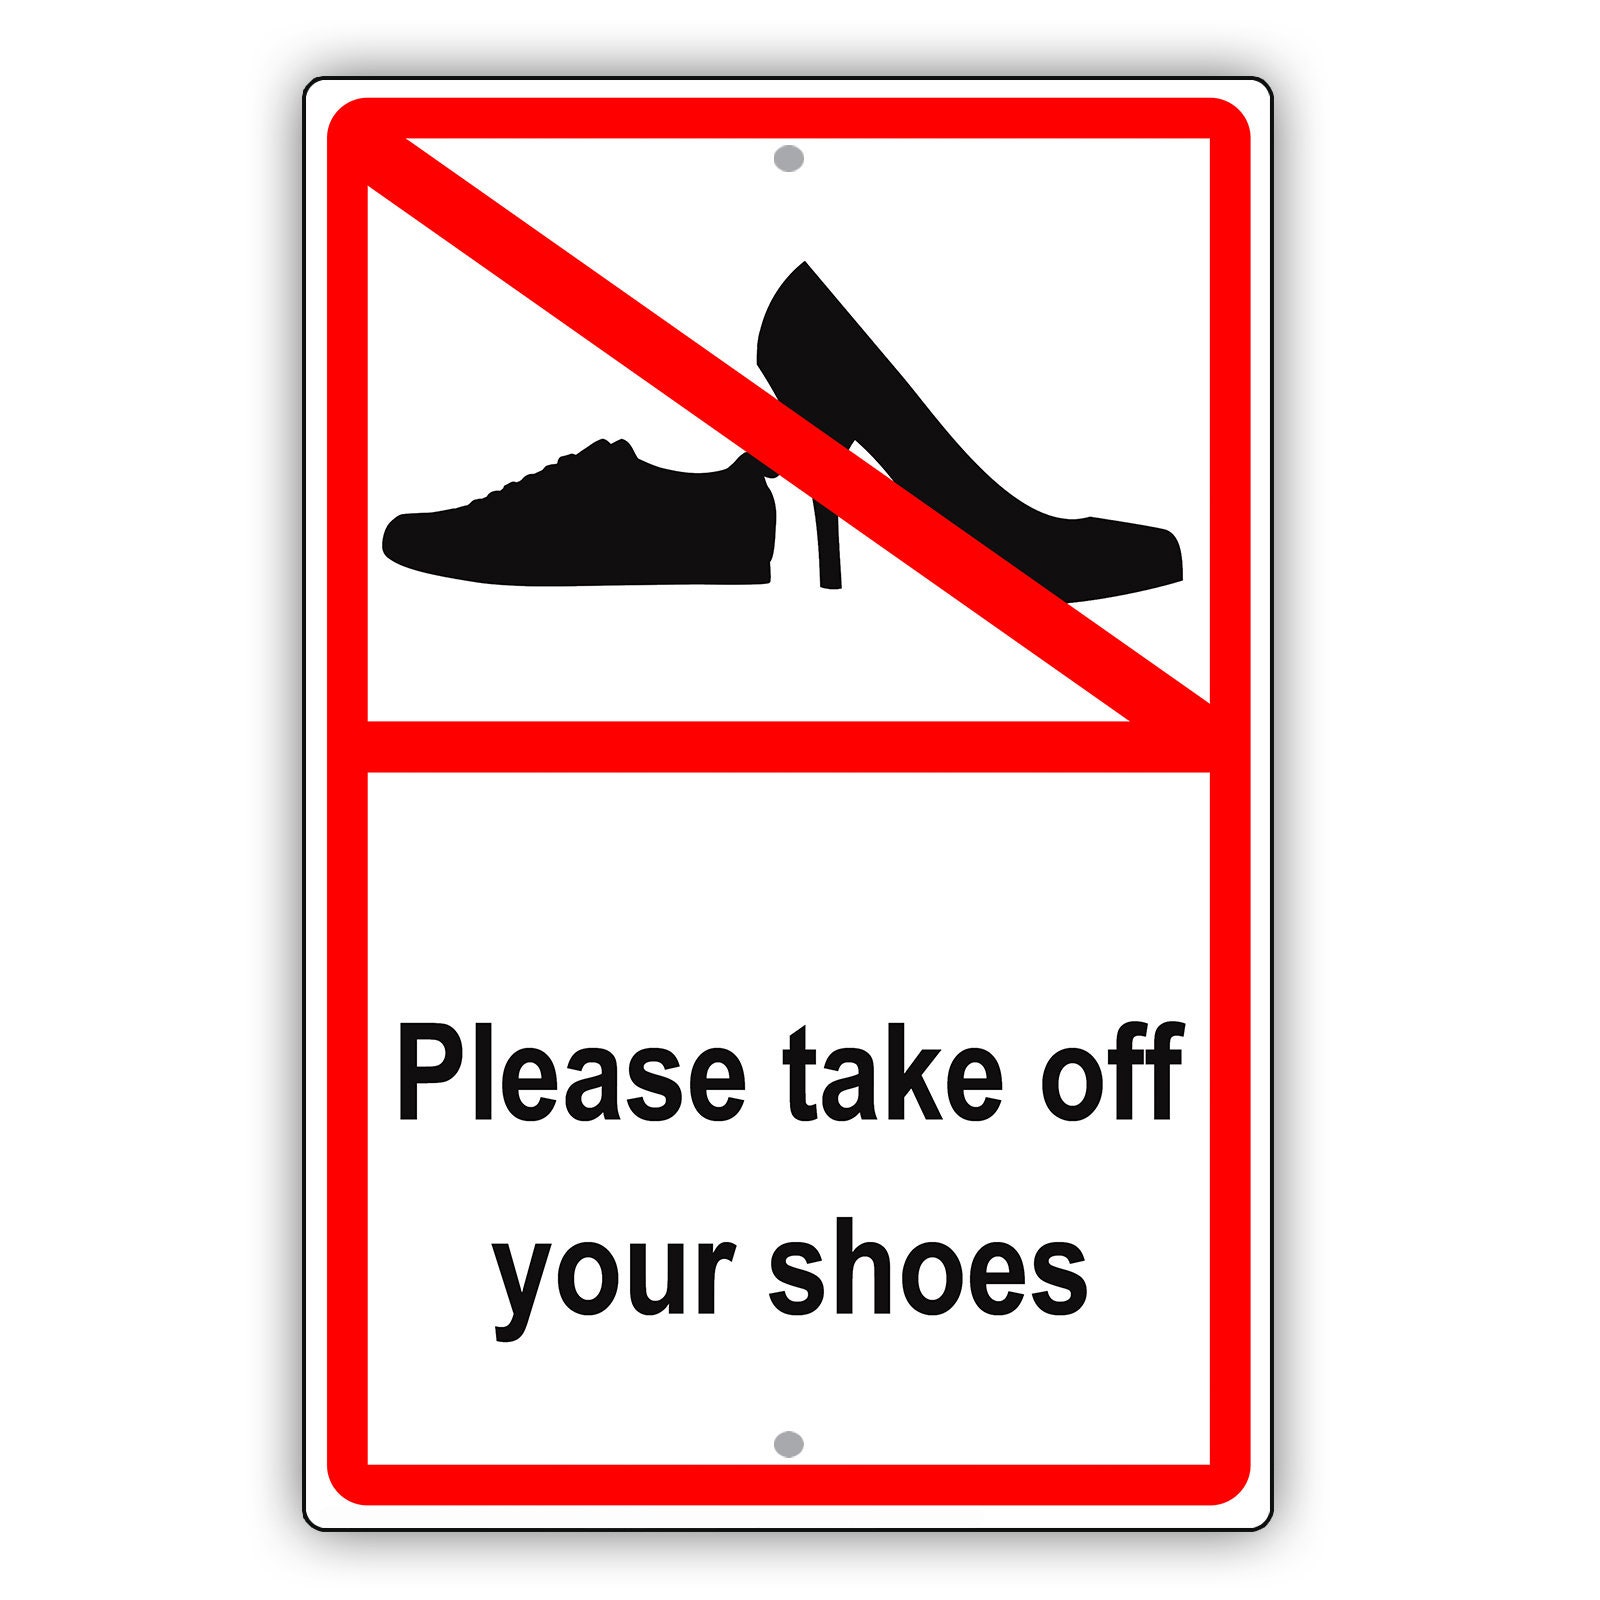 Please take off your Shoes. Take off Shoes. Take off картинка. Обувь off keep.